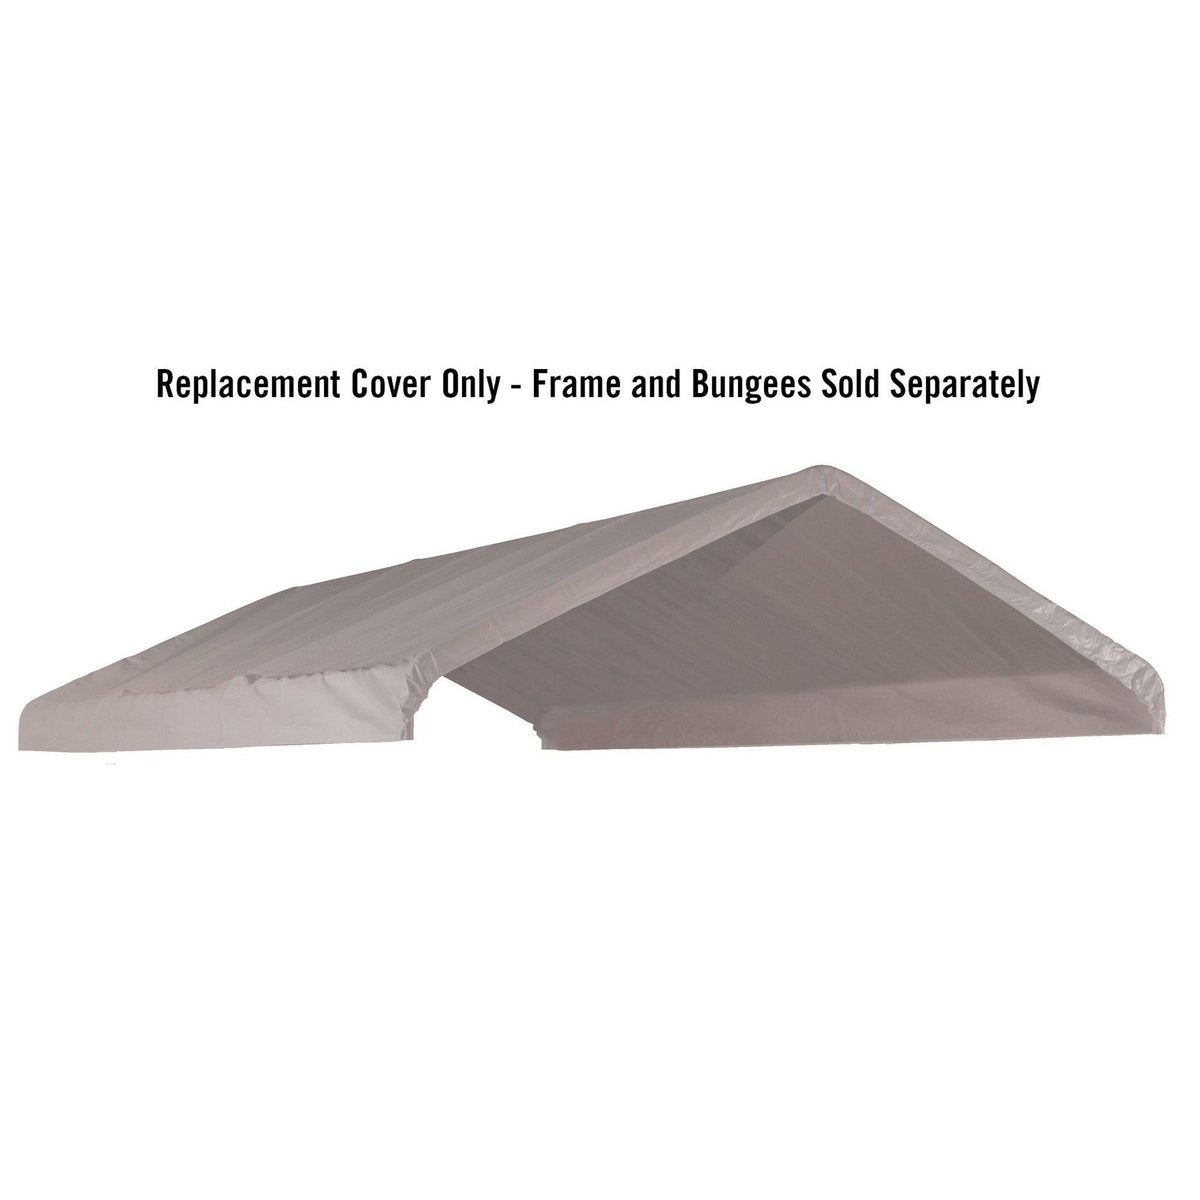 ShelterLogic 11072 10 x 20- Feet Canopy Replacement Cover, Fits 2- Inch Frame